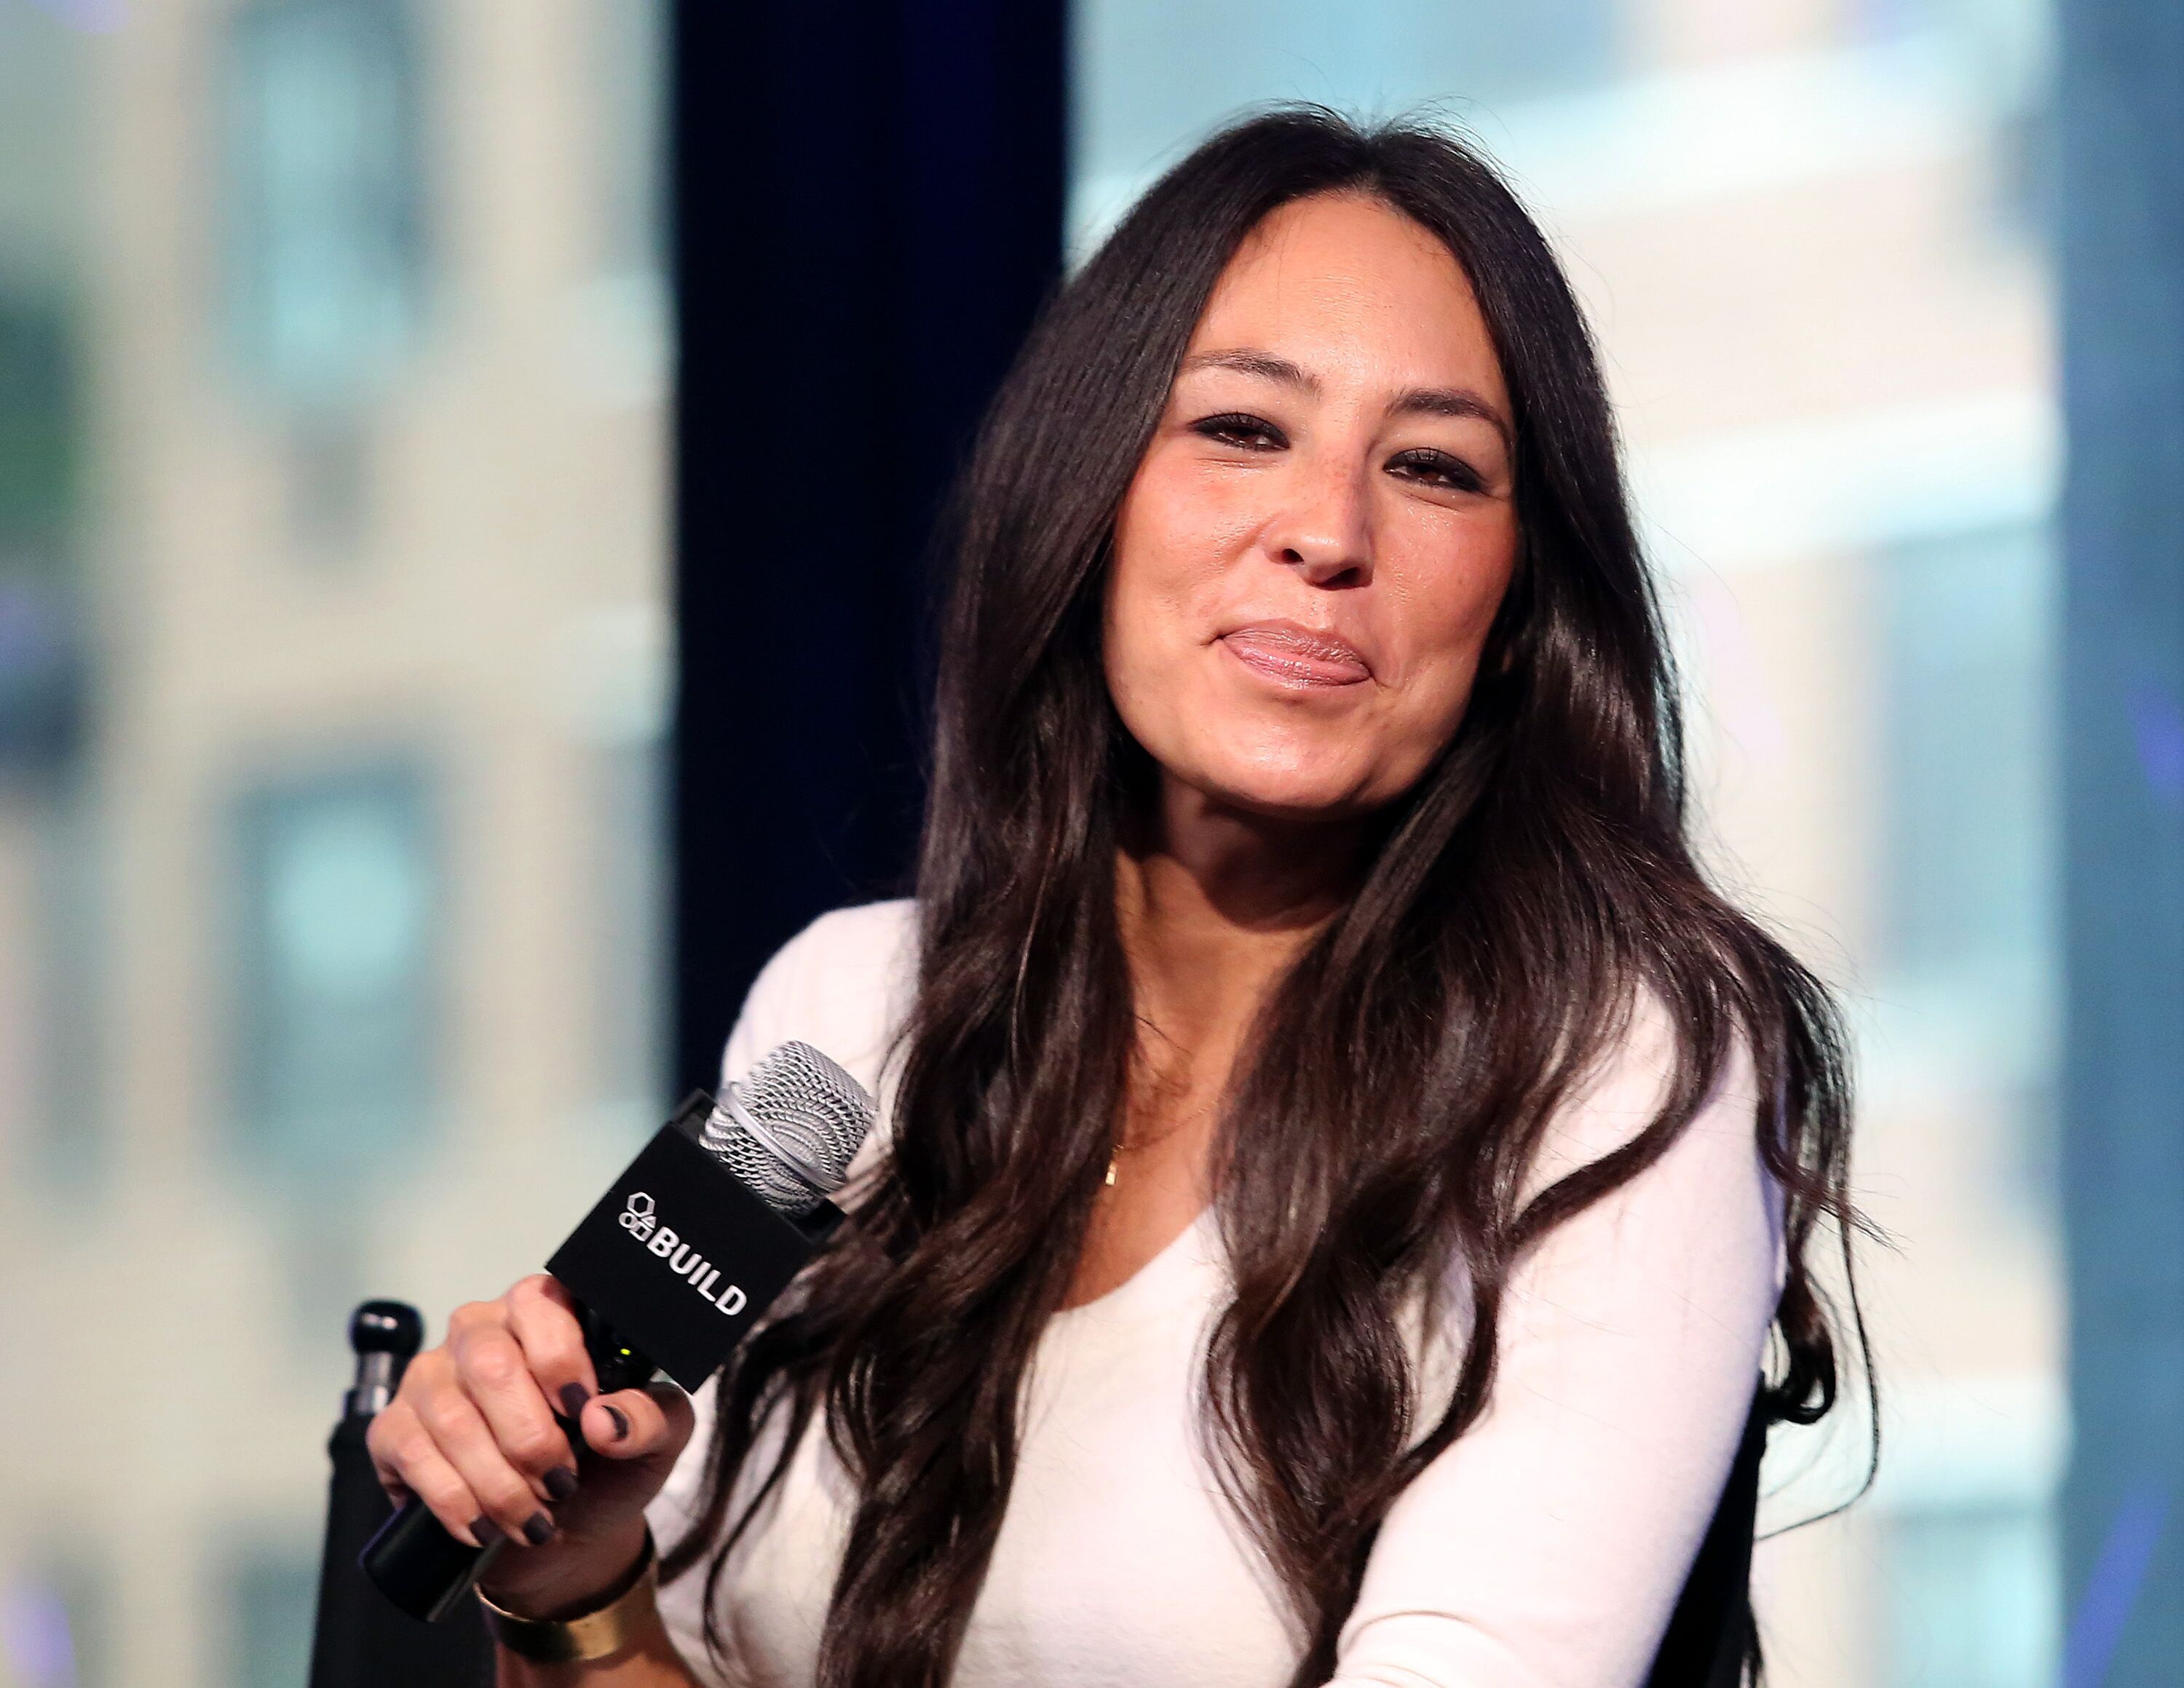 Designer Joanna Gaines appear to promote "The Magnolia Story" during the AOL BUILD Series at AOL HQ on October 19, 2016 | Photo: Getty Images